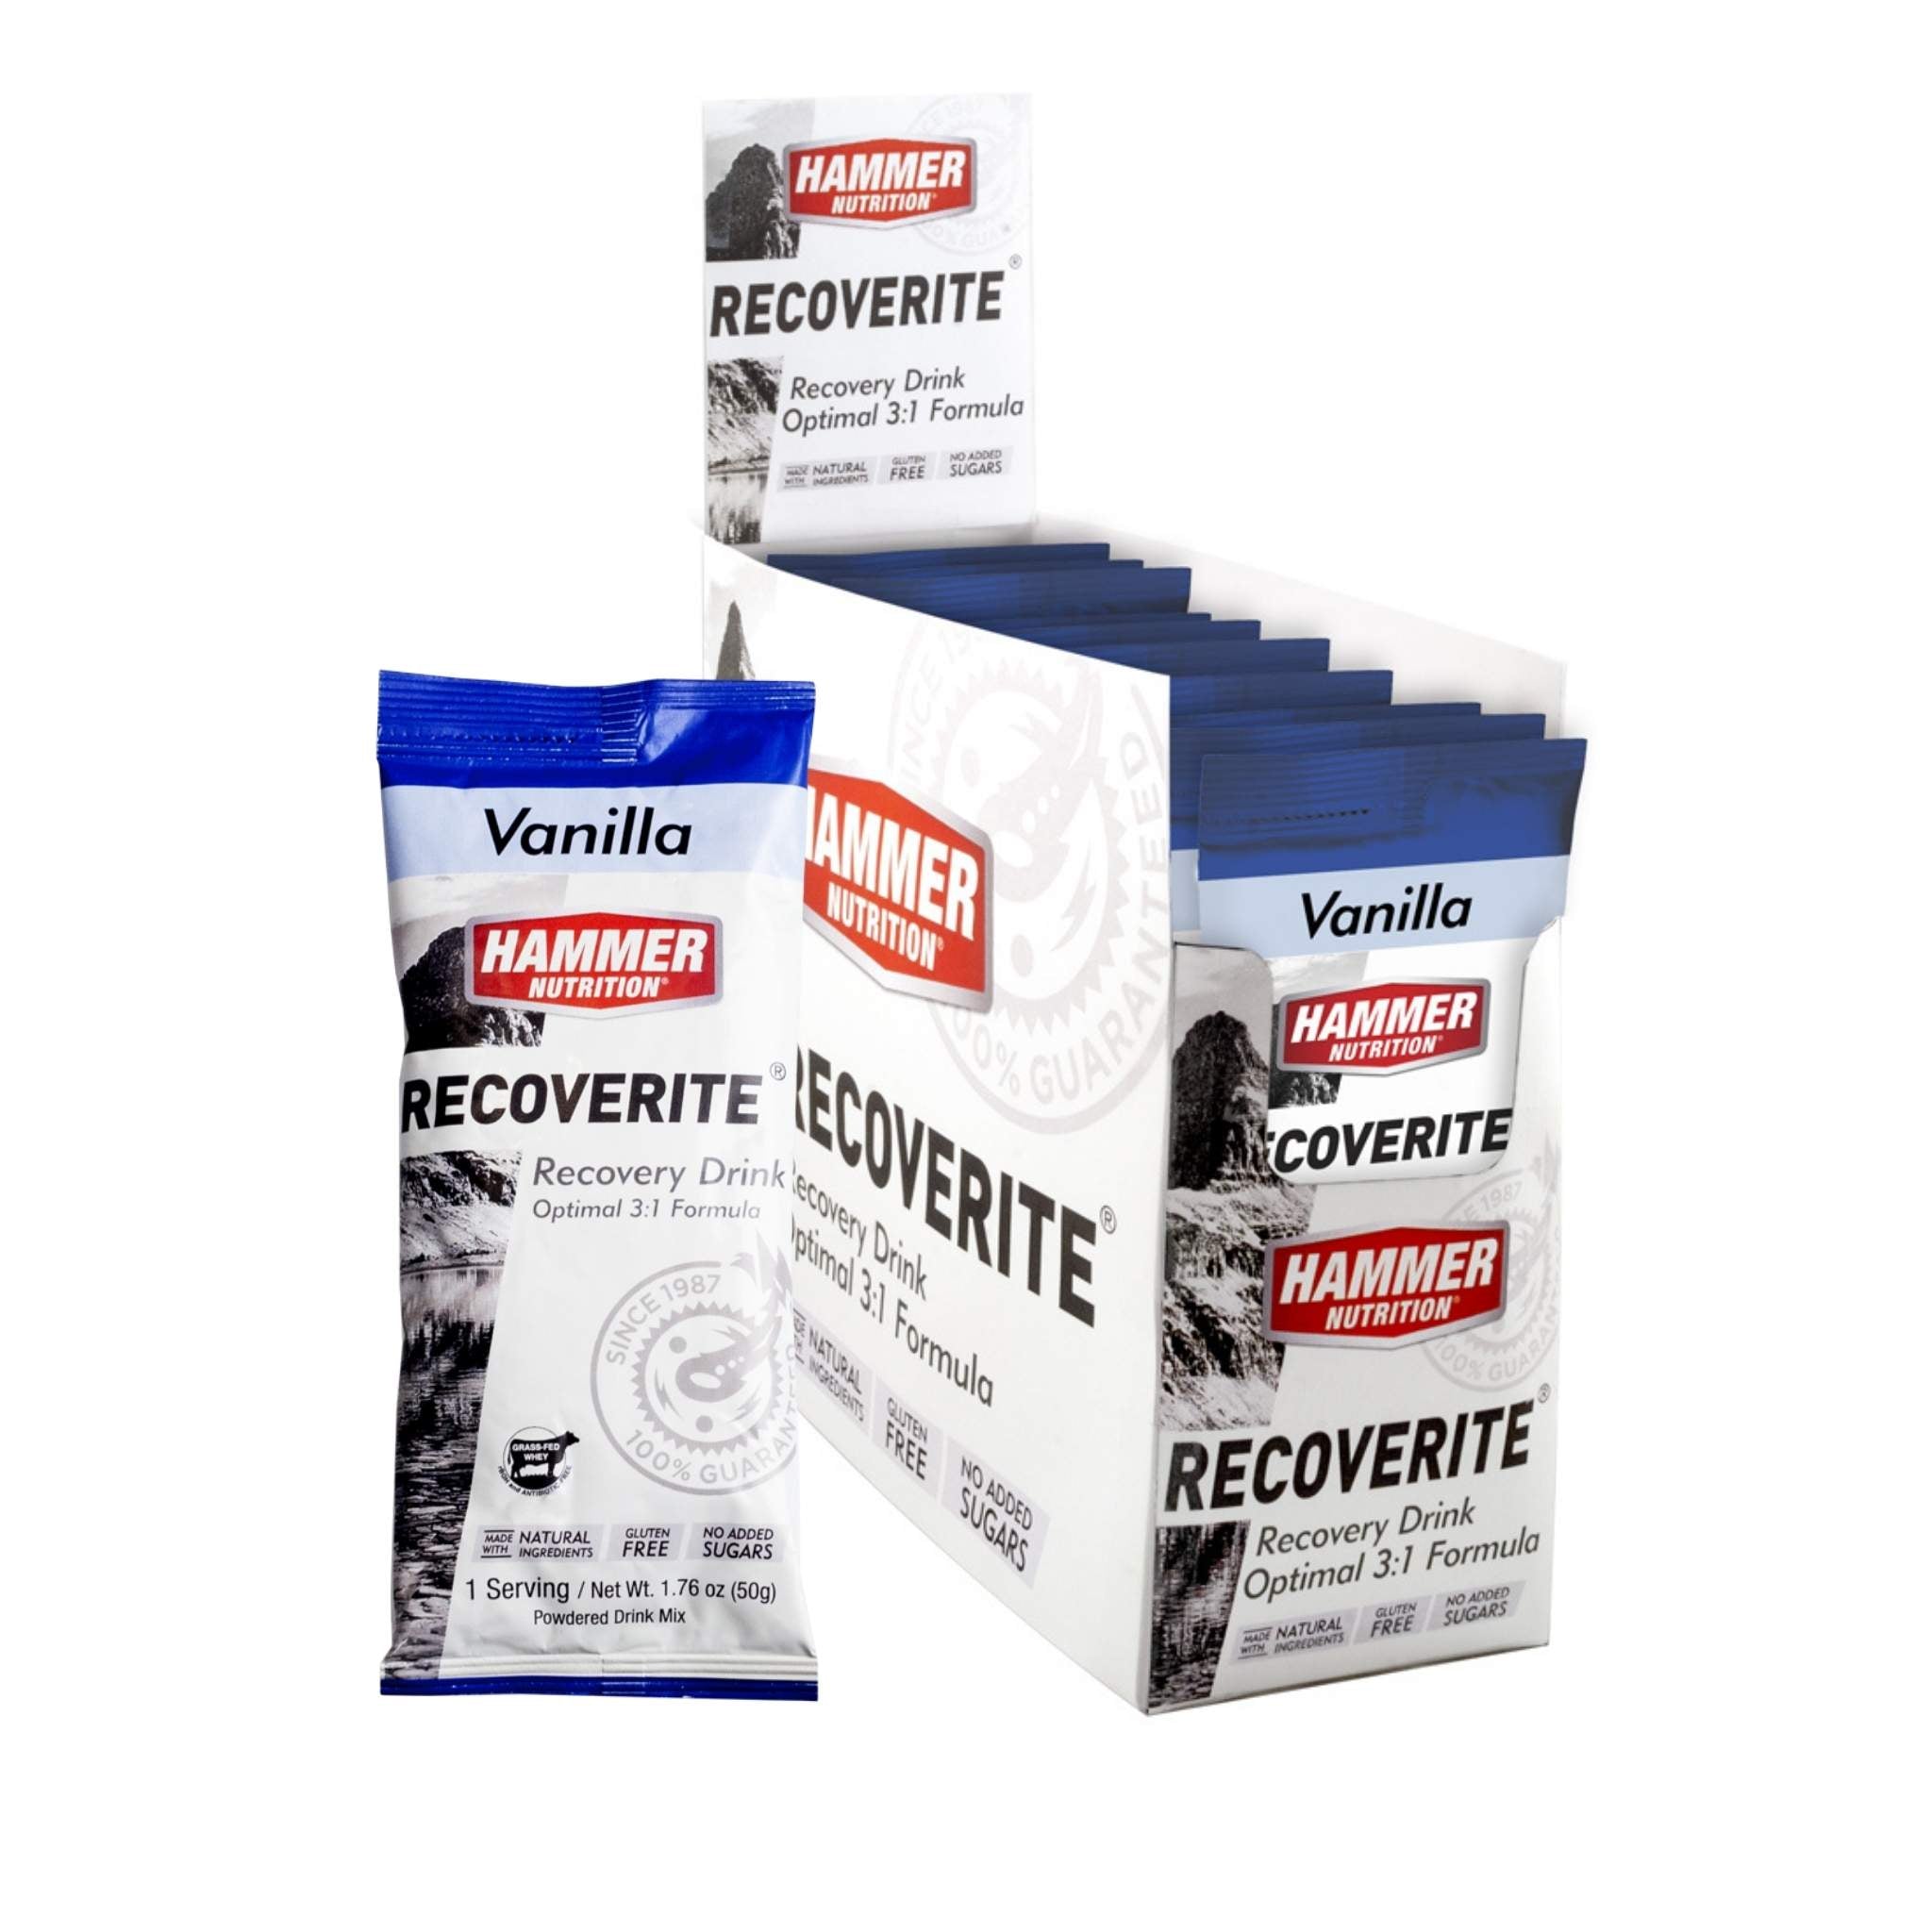 Hammer Nutrition - Recoverite, Vanilla, Box of 12 Servings, Shown with packaging, Team Perfect